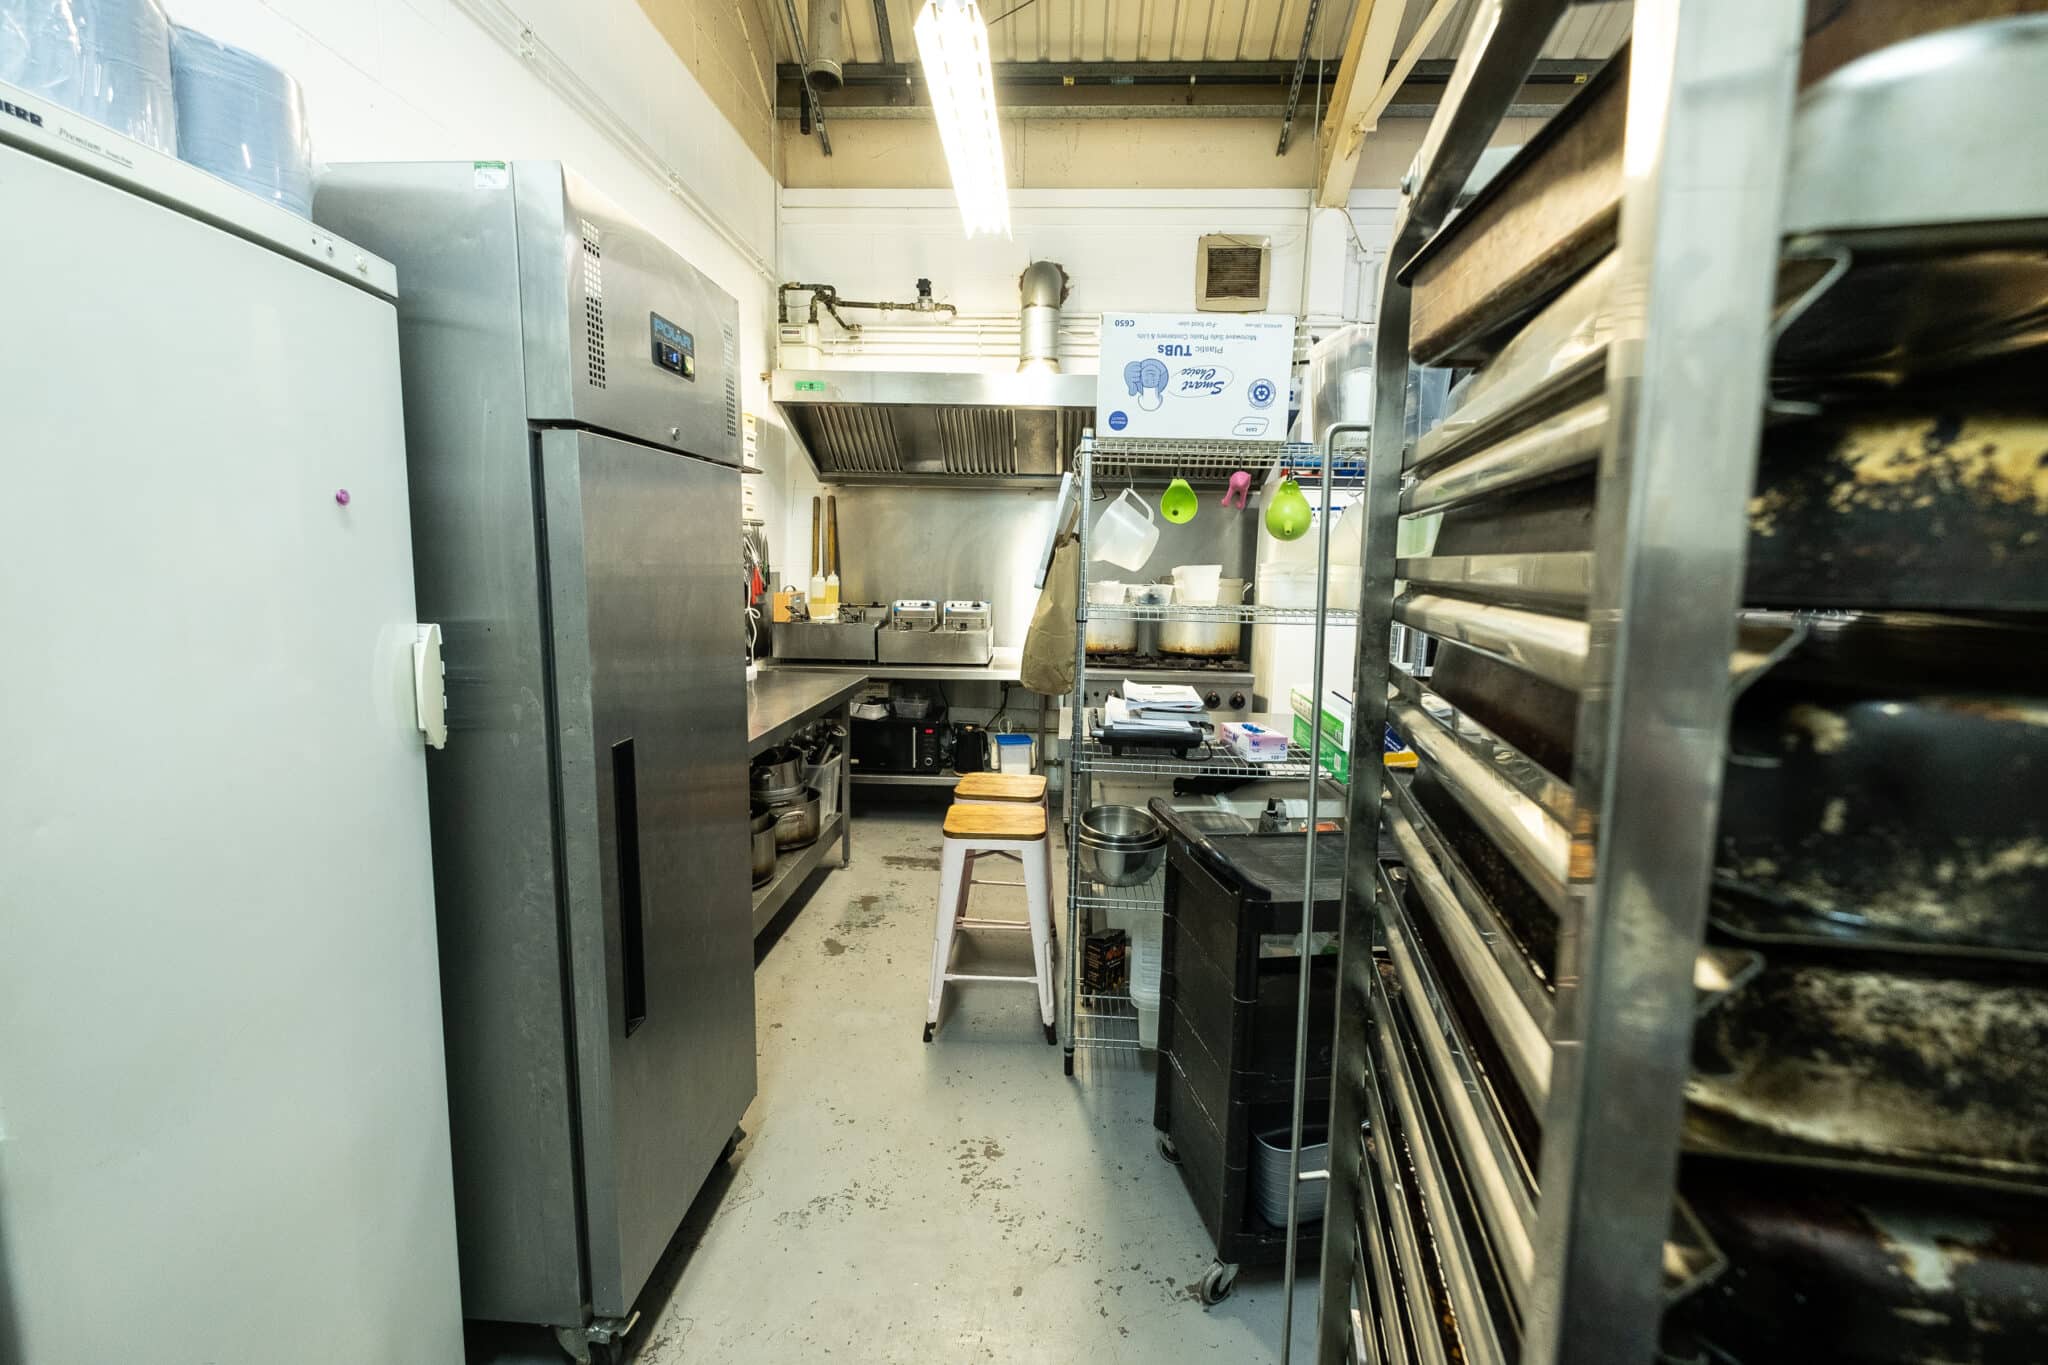 Industrial kitchen filled with metal surfaces, fridges and racks of baking trays.